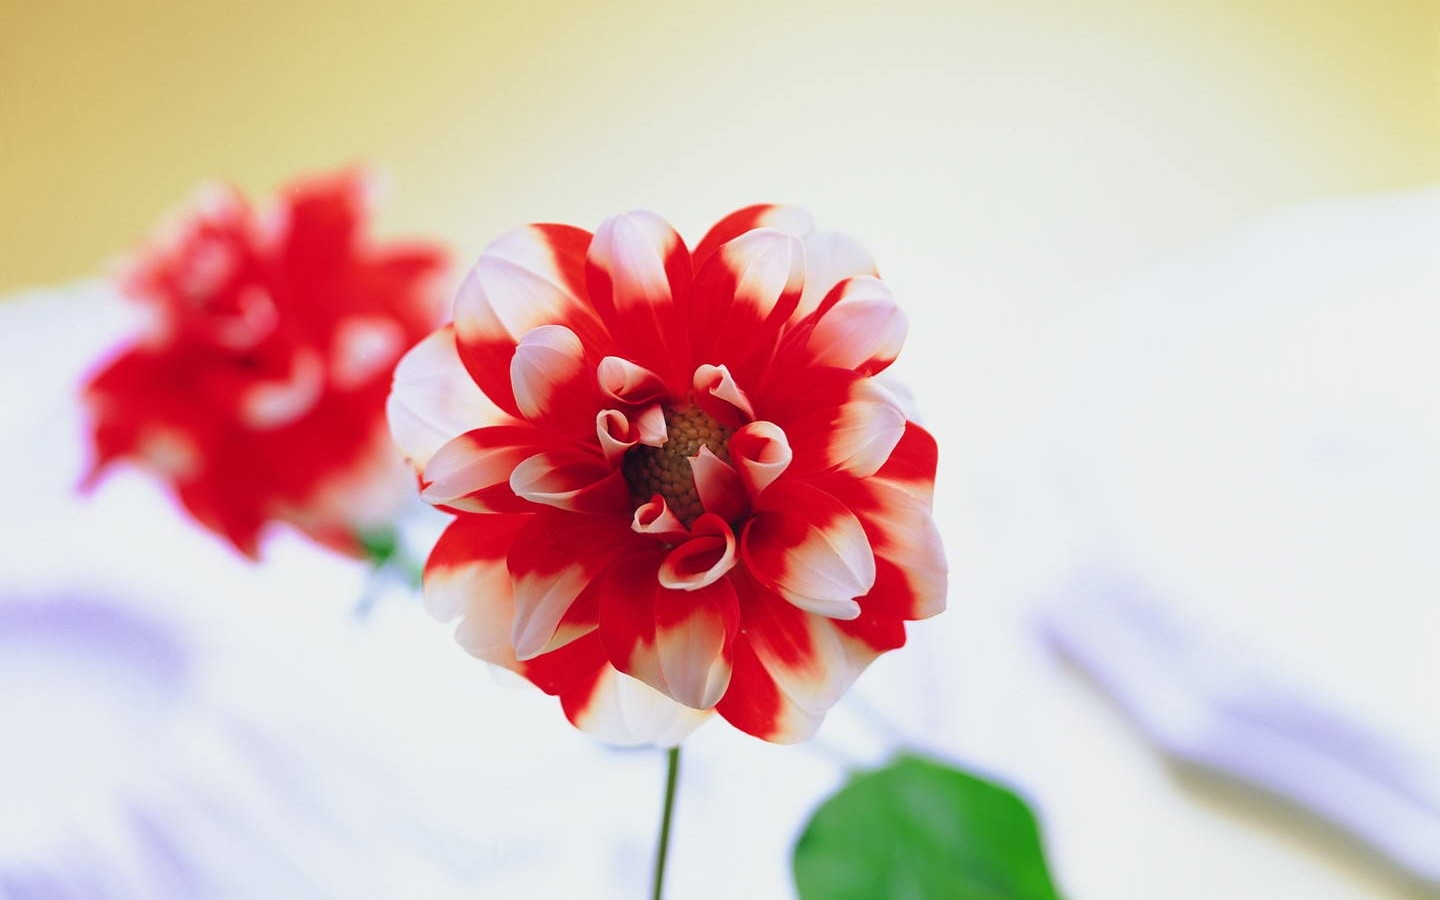 Rate Select Rating Give Red And White Flower